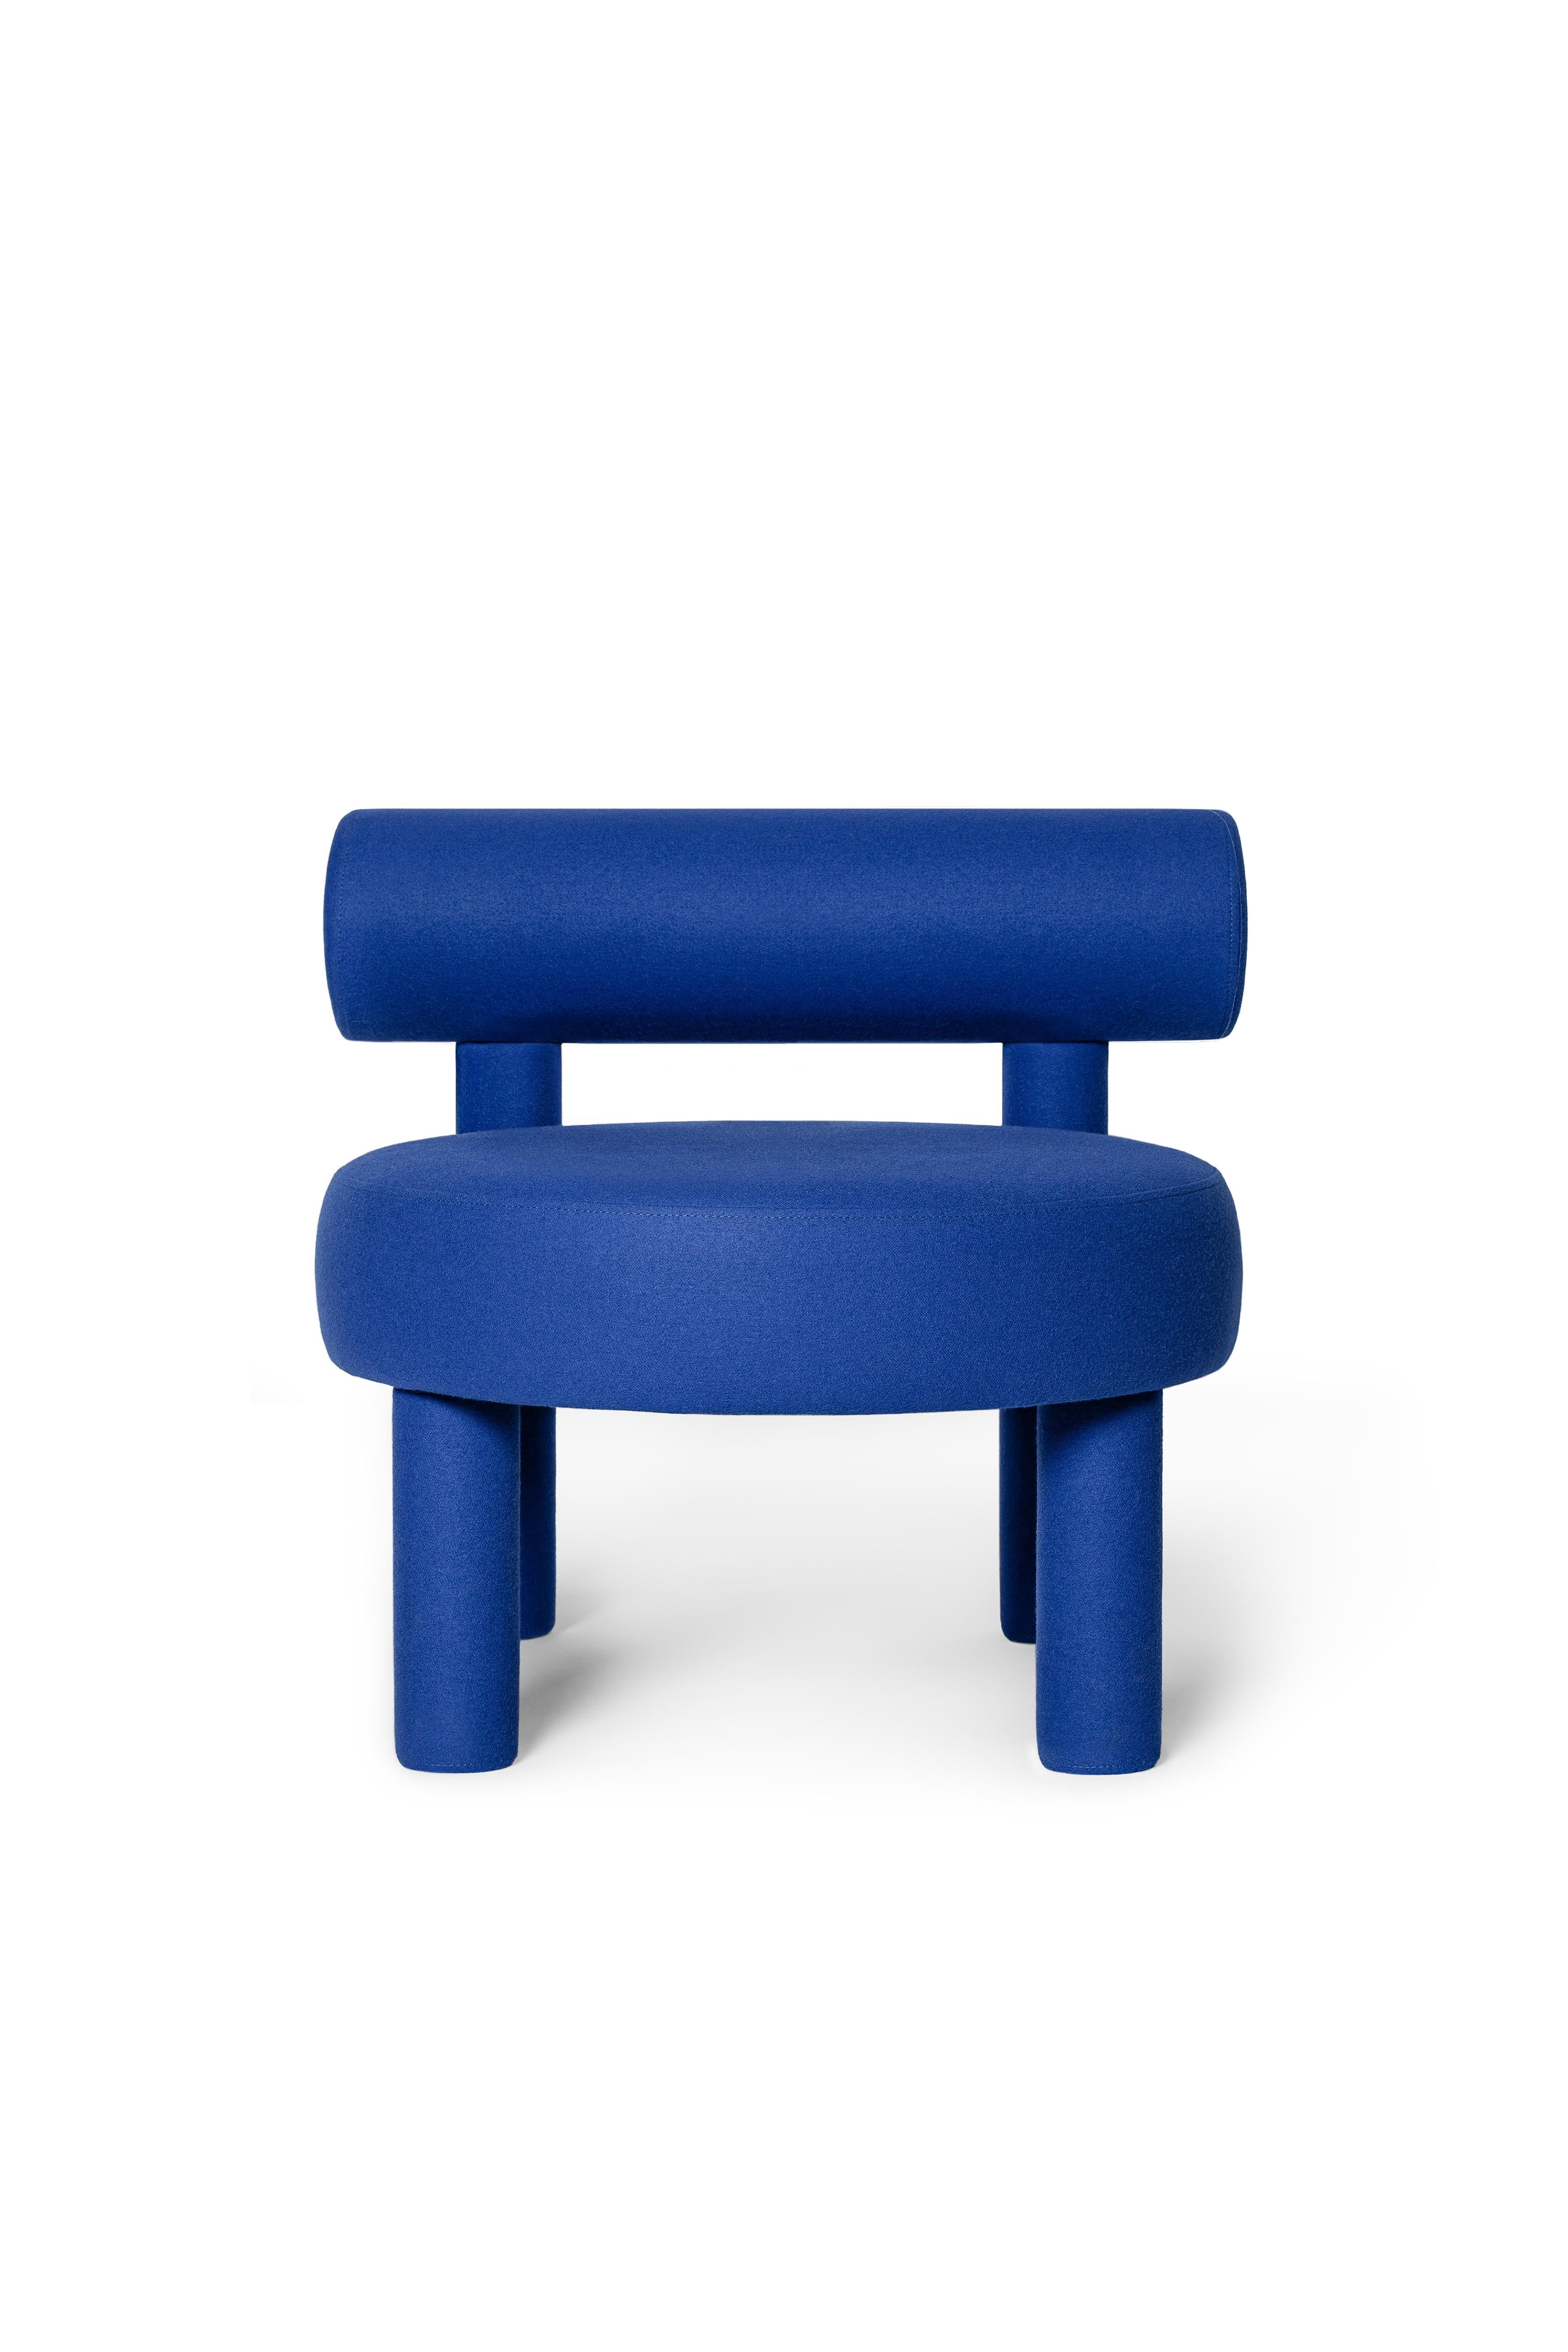 Fabric Modern Low Chair Gropius CS1 in Fire Retardant Cobalt Blue Wool fabric by NOOM For Sale